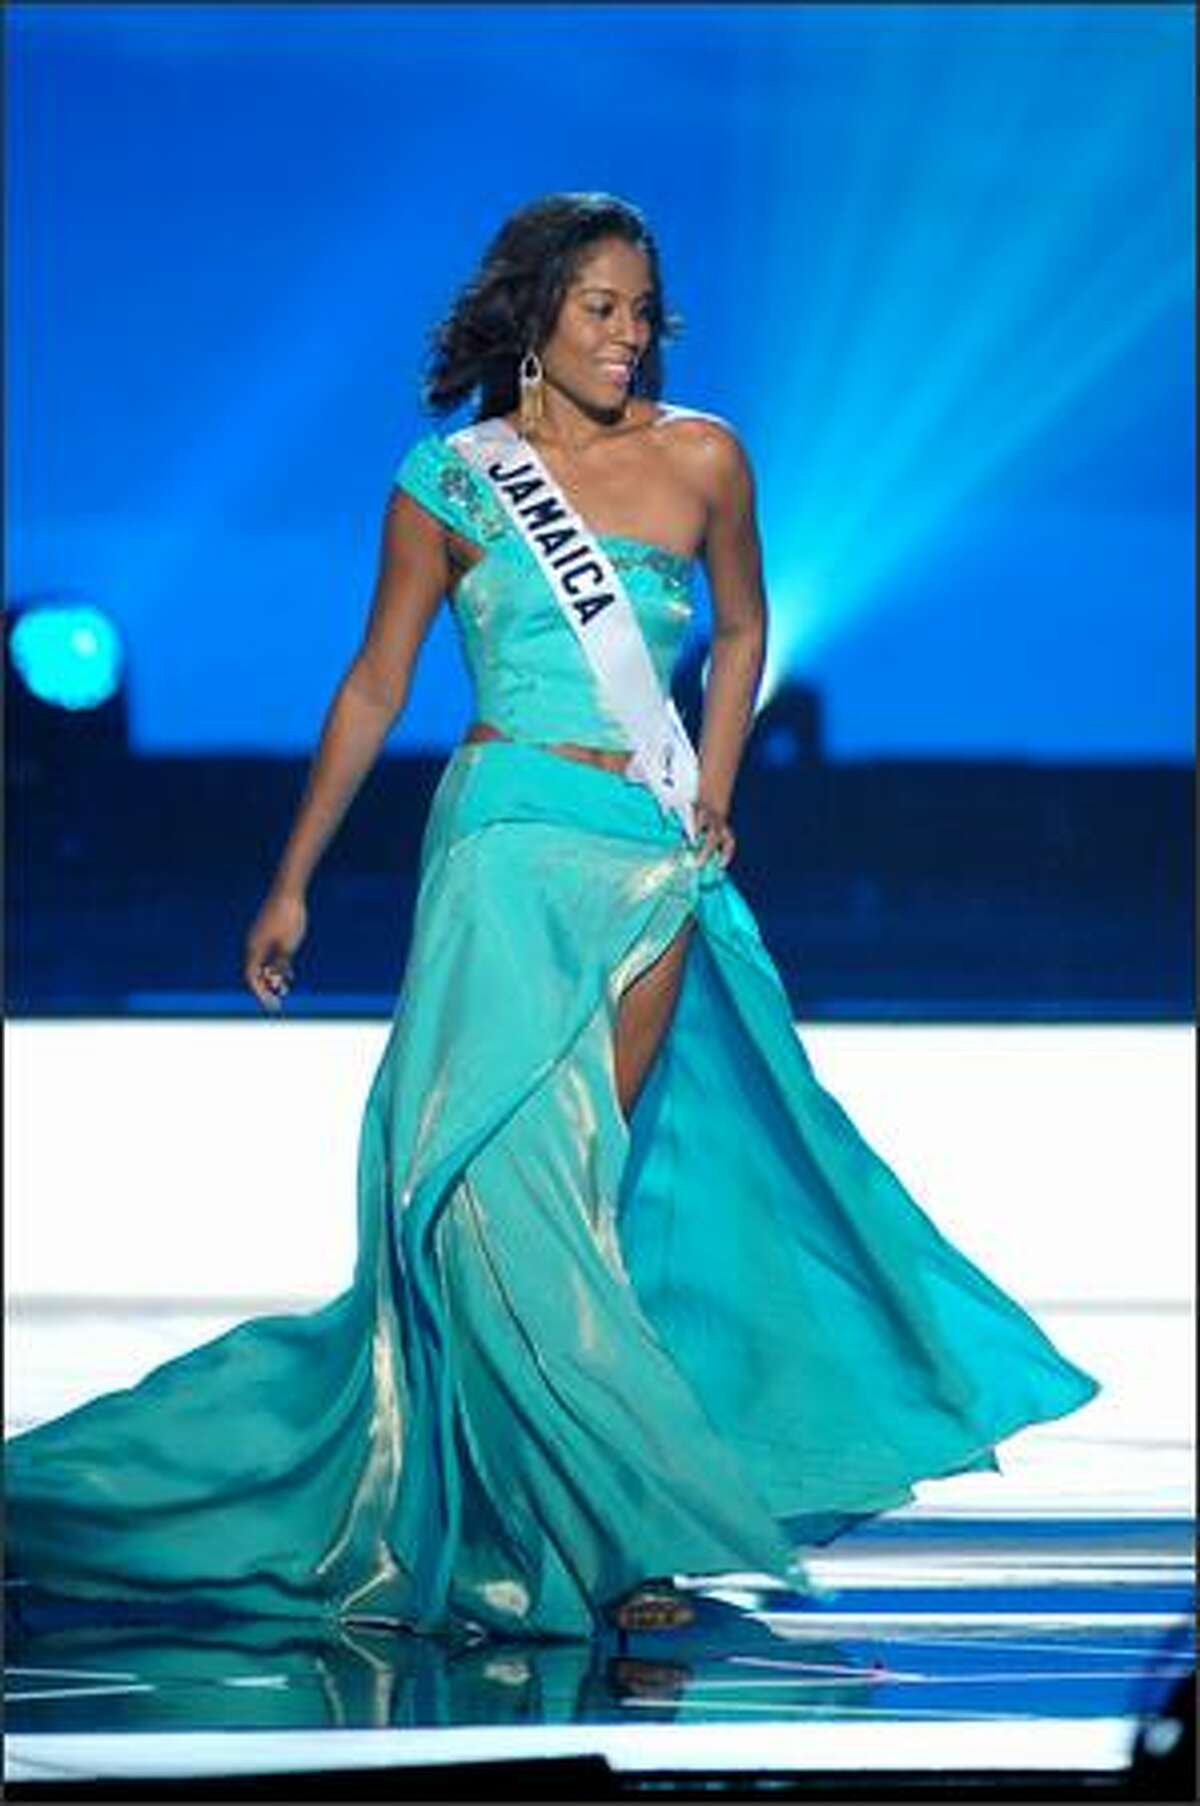 Raquel Wright, Miss Jamaica, competes in an evening gown of her choice during the 2005 Miss Universe Presentation Show at Impact Arena, Exhibition and Convention Center in Bangkok, Thailand on May 26. During the presentation show, each contestant was judged by a preliminary panel of six judges in swimsuit and evening gown categories, after two days of one-on-one interviews. The scores will be tallied and the top 15 contestants will be announced during Monday's telecast (NBC, tape-delayed to 9 p.m. PDT), at the conclusion of which a winner will be crowned.